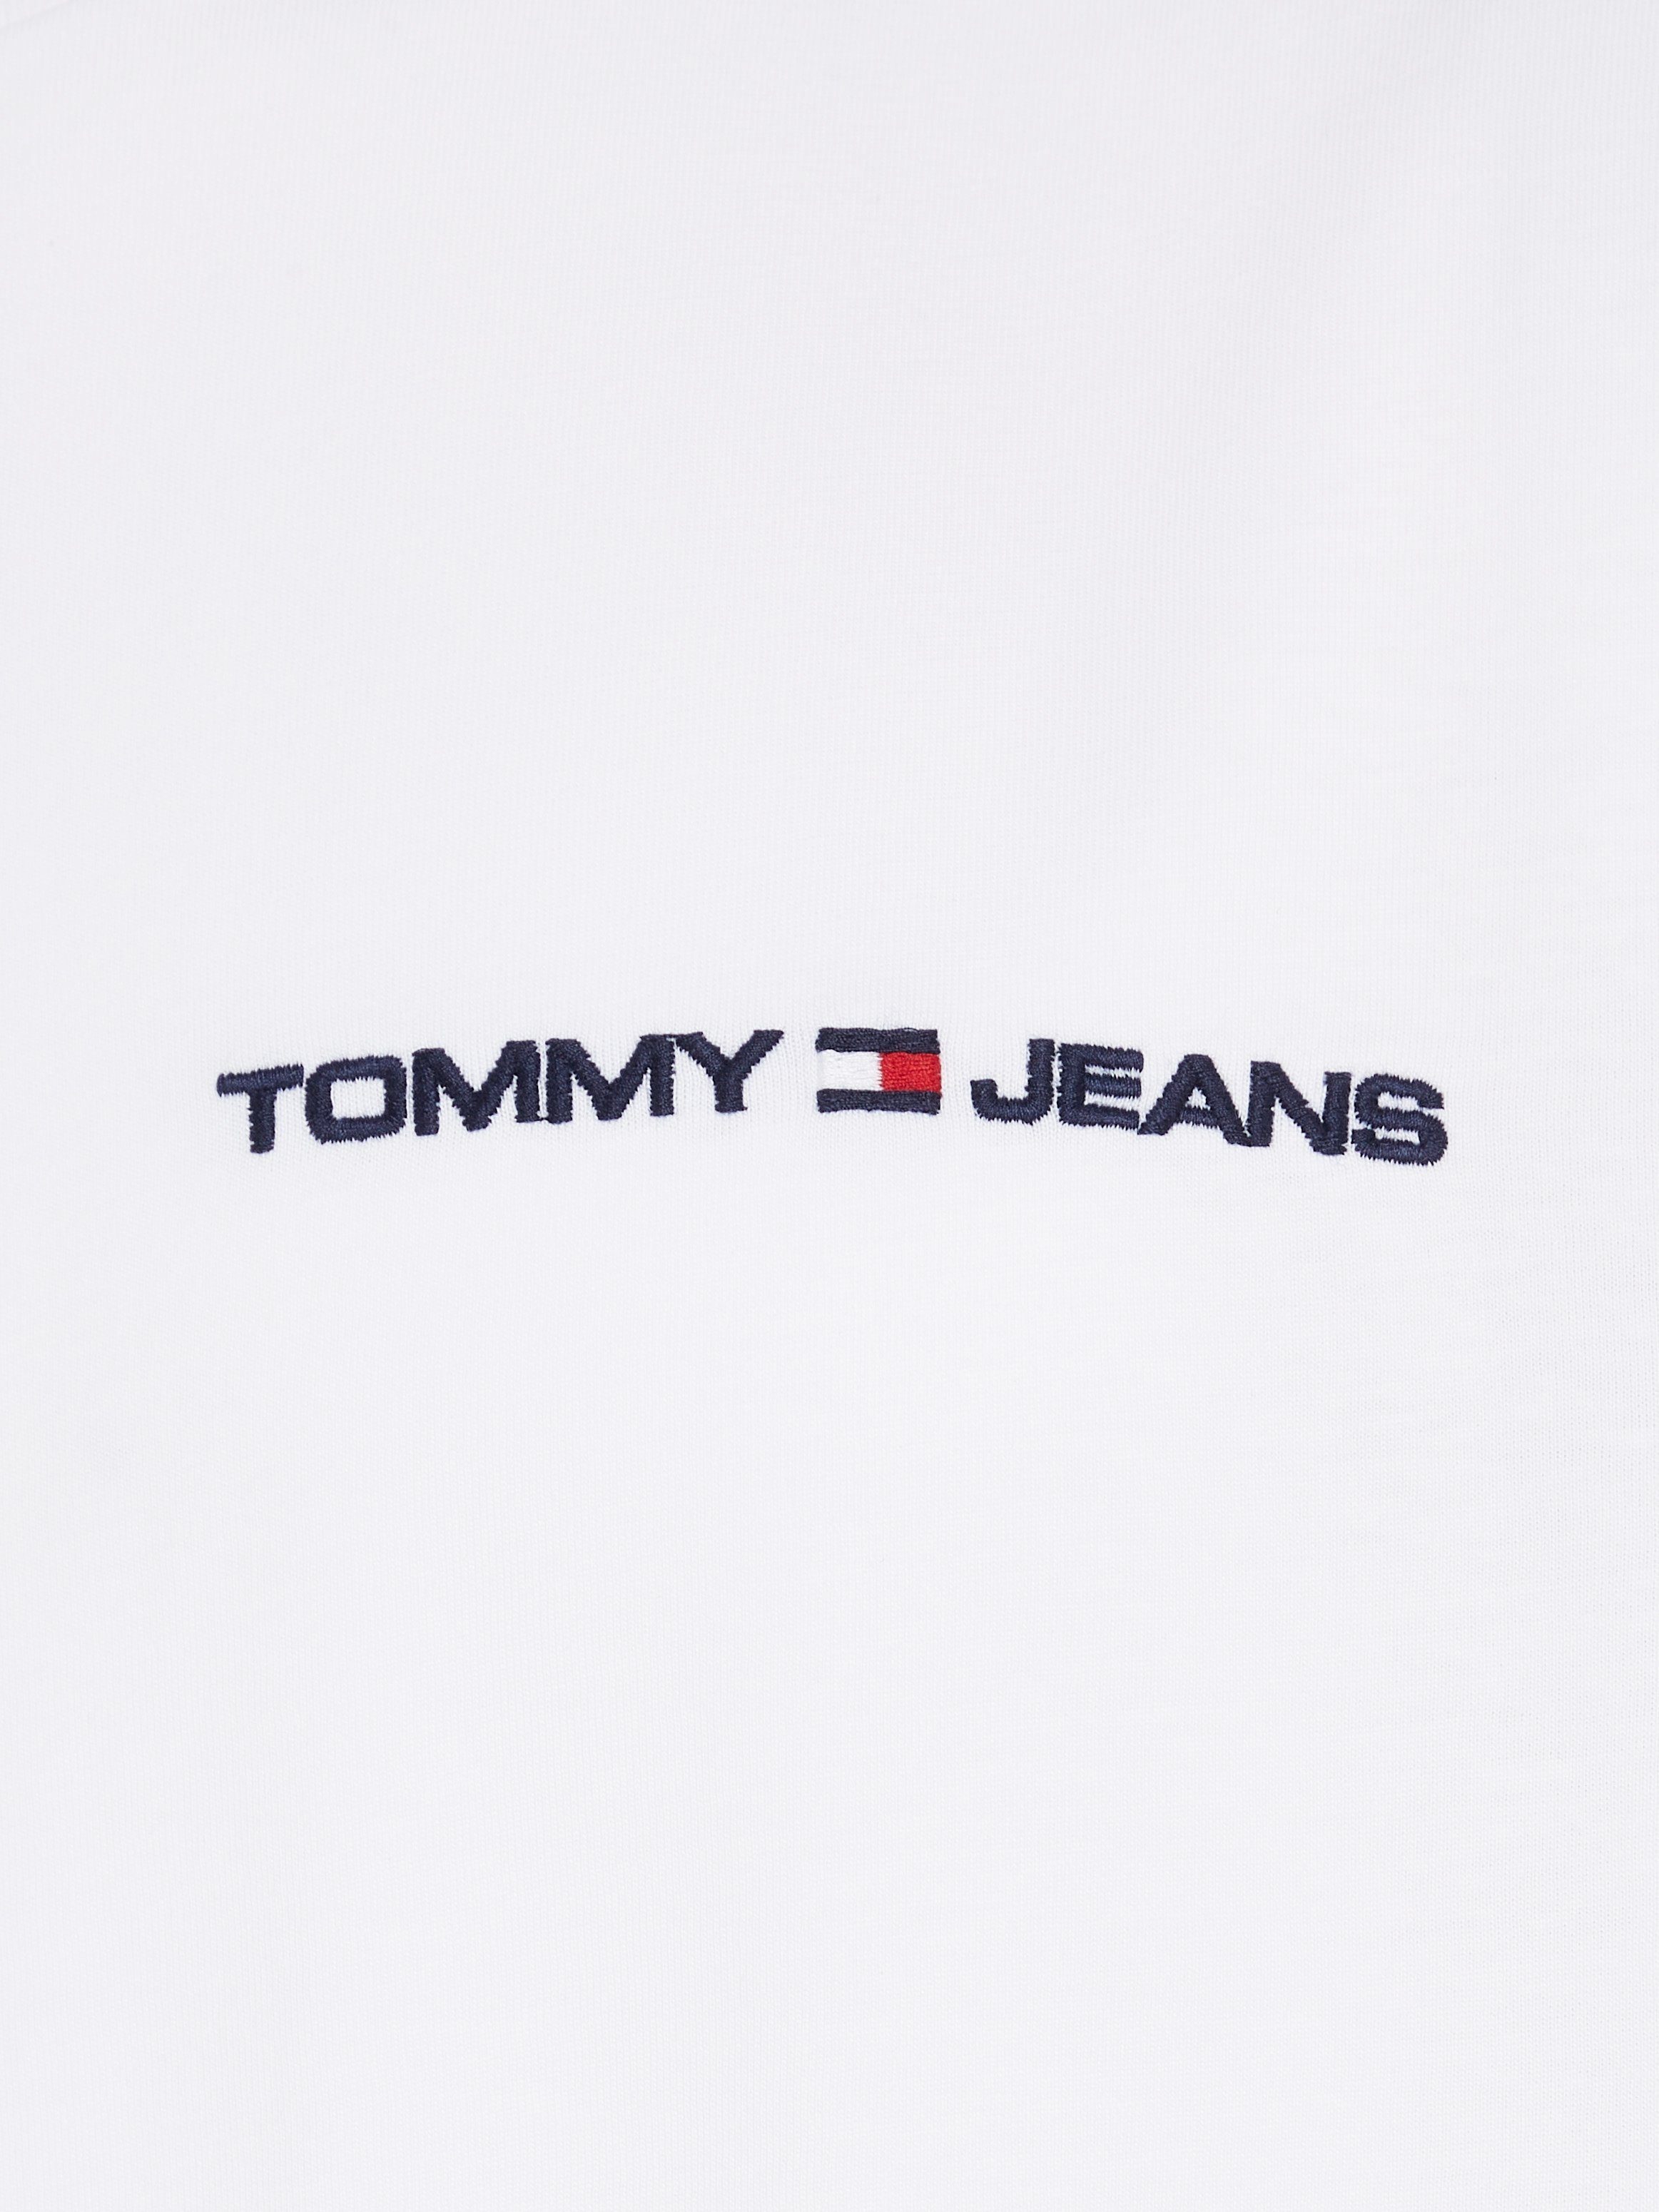 CHEST TJM Jeans LINEAR White T-Shirt TEE CLSC Tommy